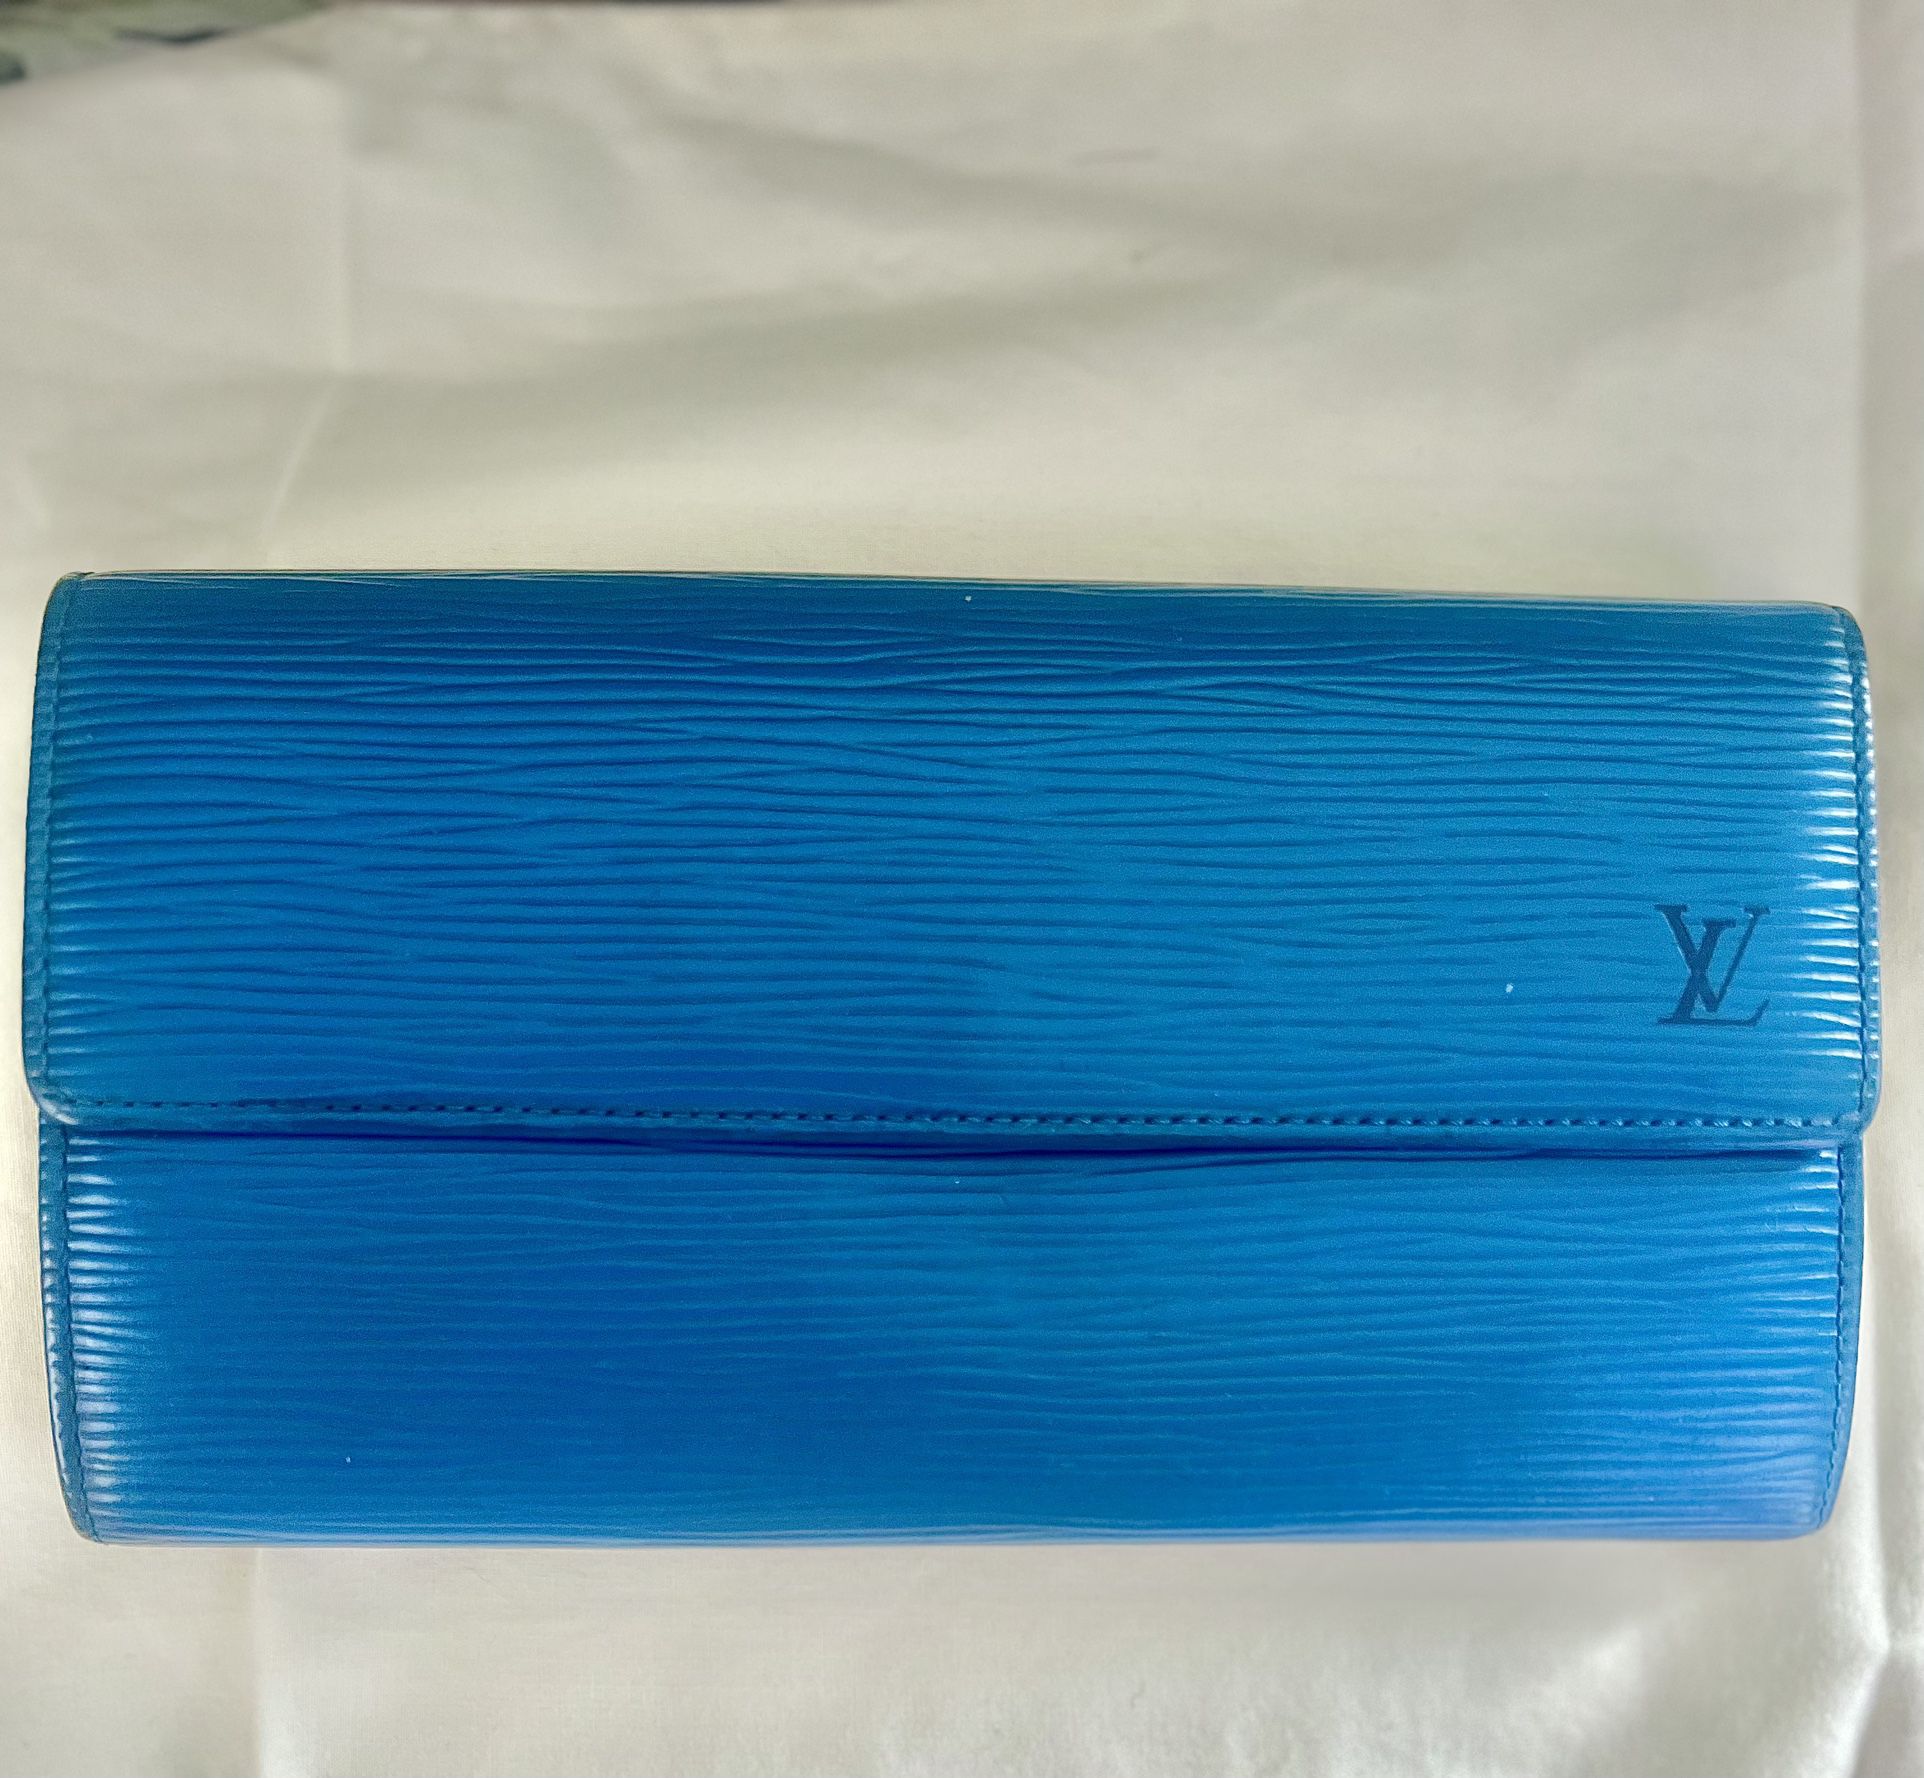 LOUIS VUITTON 50% OFF TDY RARE EPI LIKE NEW CONDITION WALLET